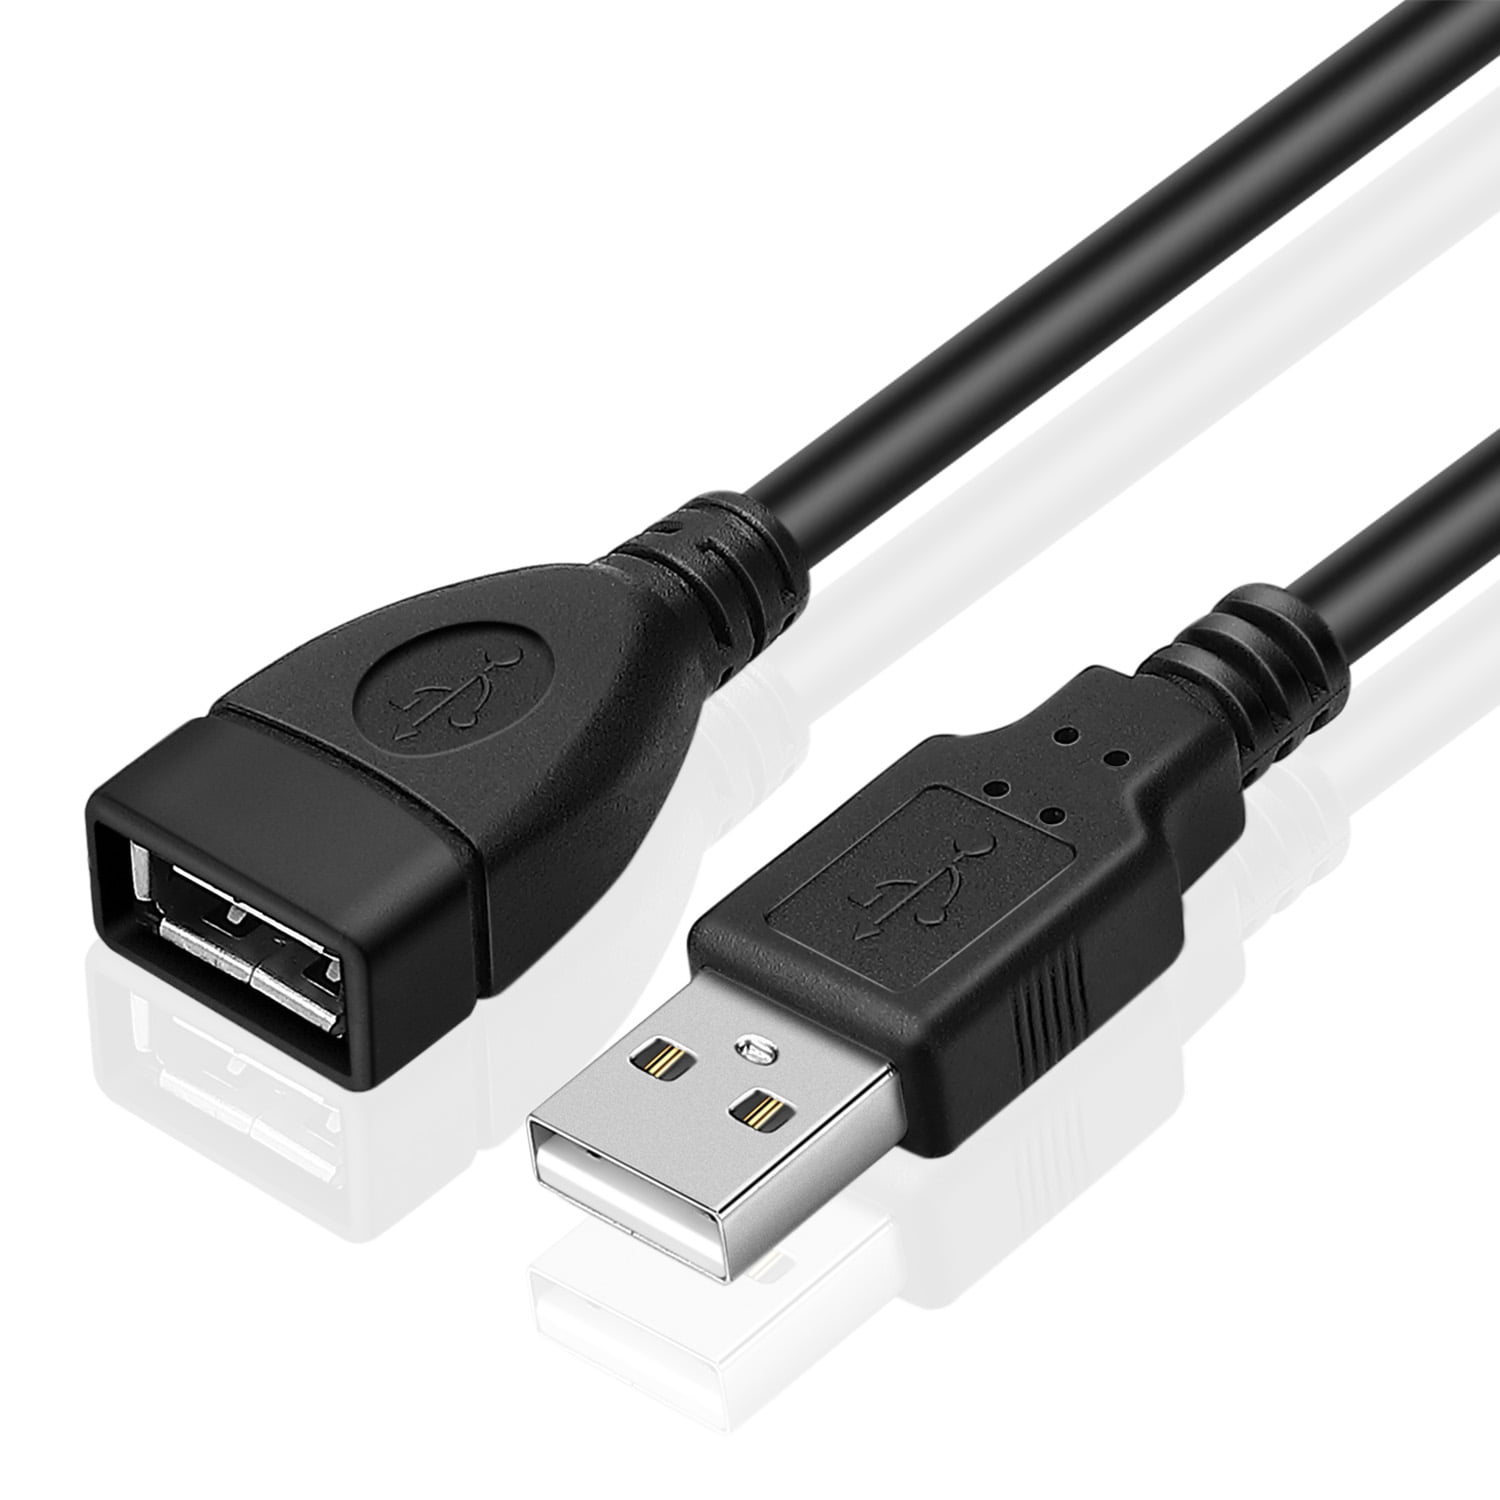 16ft USB 2.0 Extension Extender Cable Cord Standard Type A Male to Female Black 